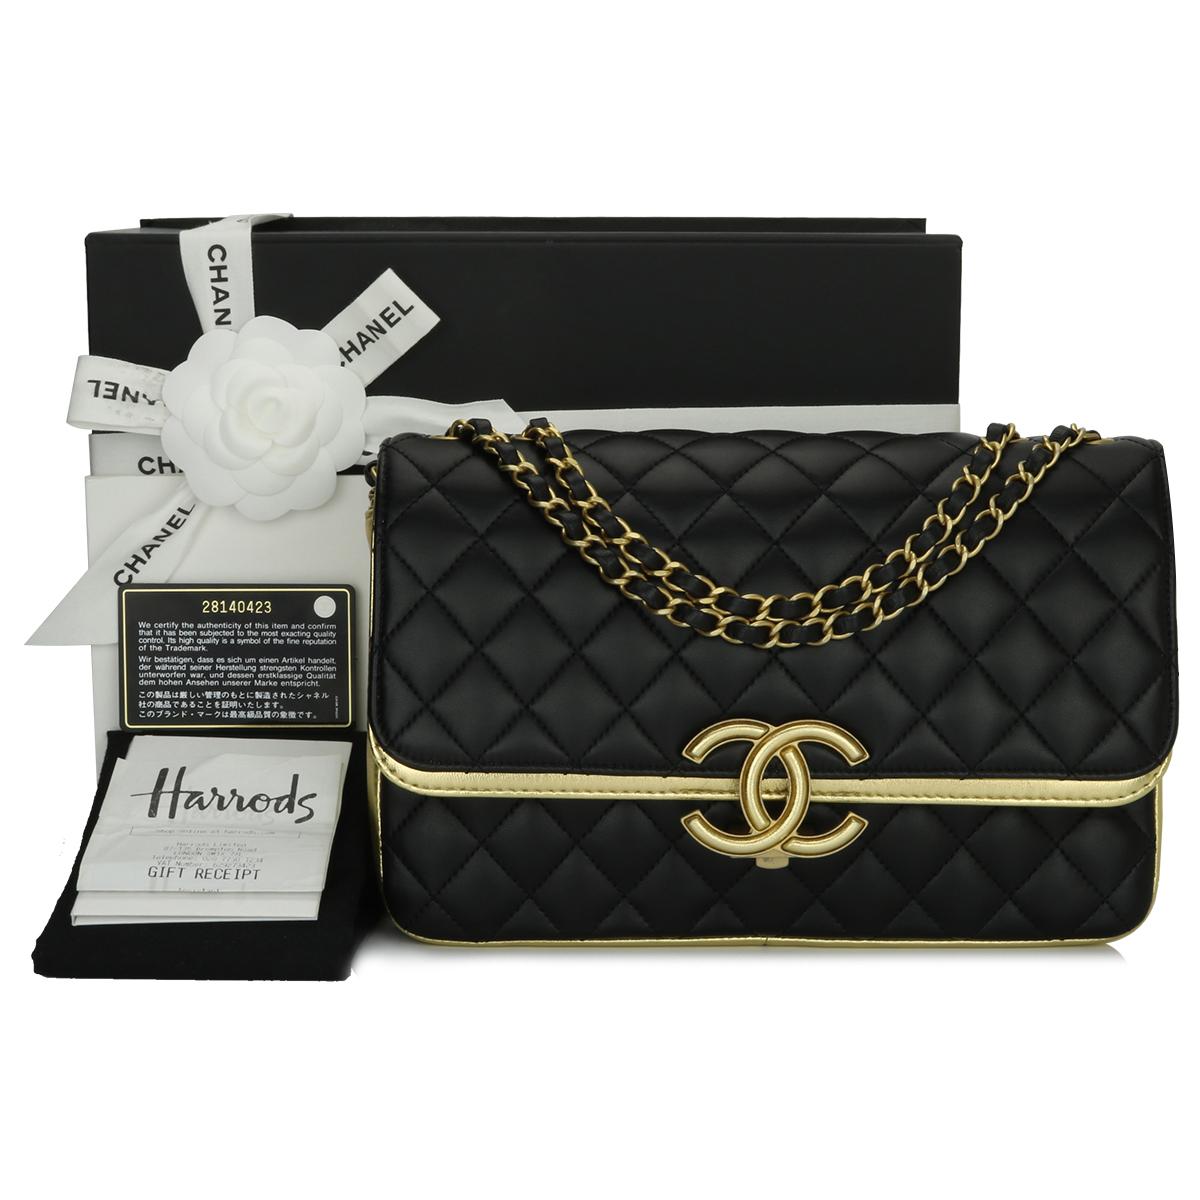 Authentic CHANEL CC Chic Flap Bag Black and Gold Lambskin with Brushed Gold Hardware 2019.

This stunning bag is in mint condition, the bag still holds its original shape, and the hardware is still very shiny.

Exterior Condition: Mint condition,